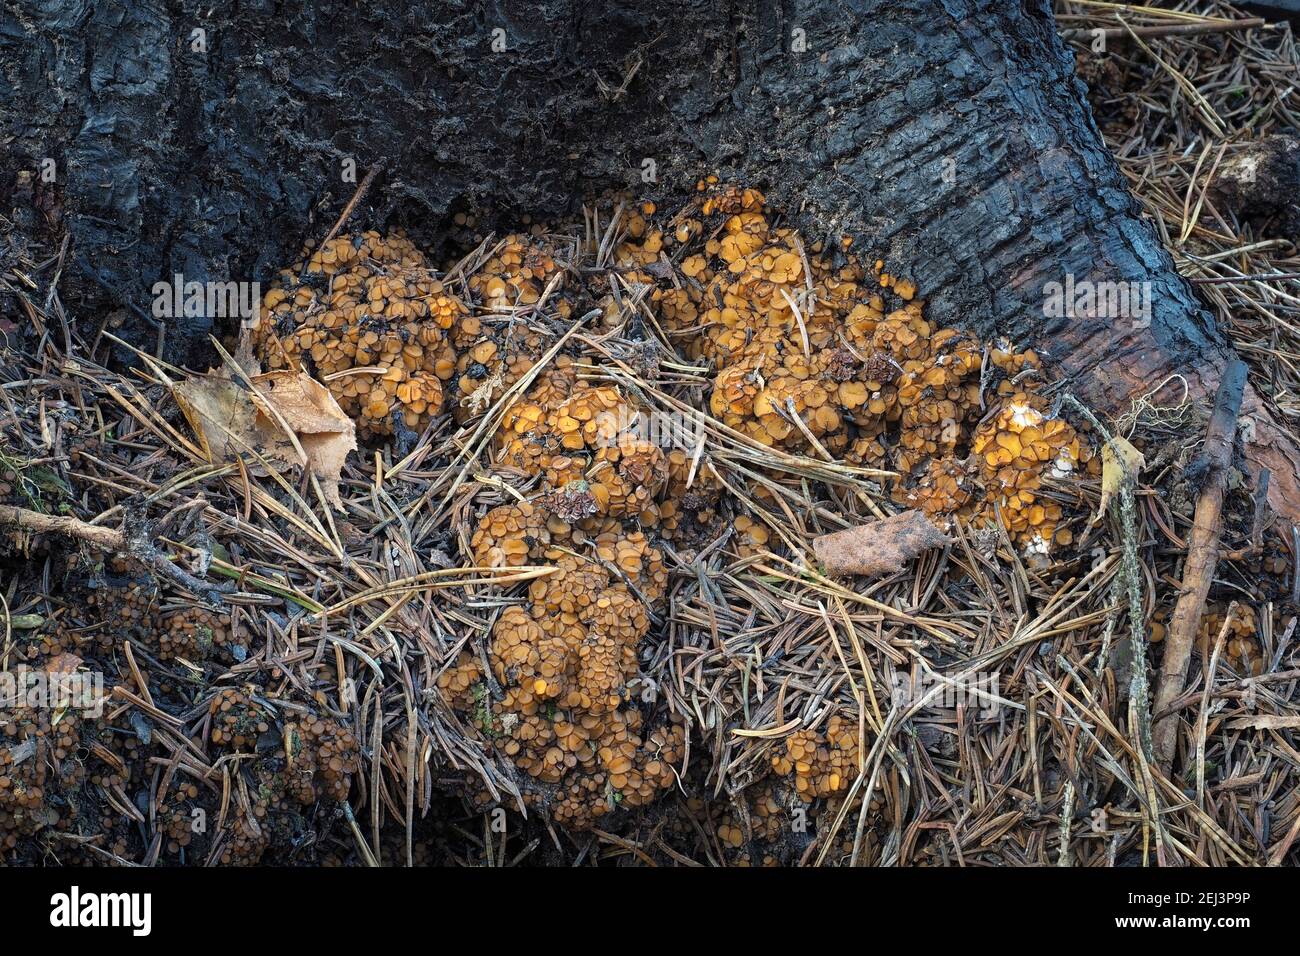 The Anthracobia nitida is an inedible mushroom , an intresting photo Stock Photo